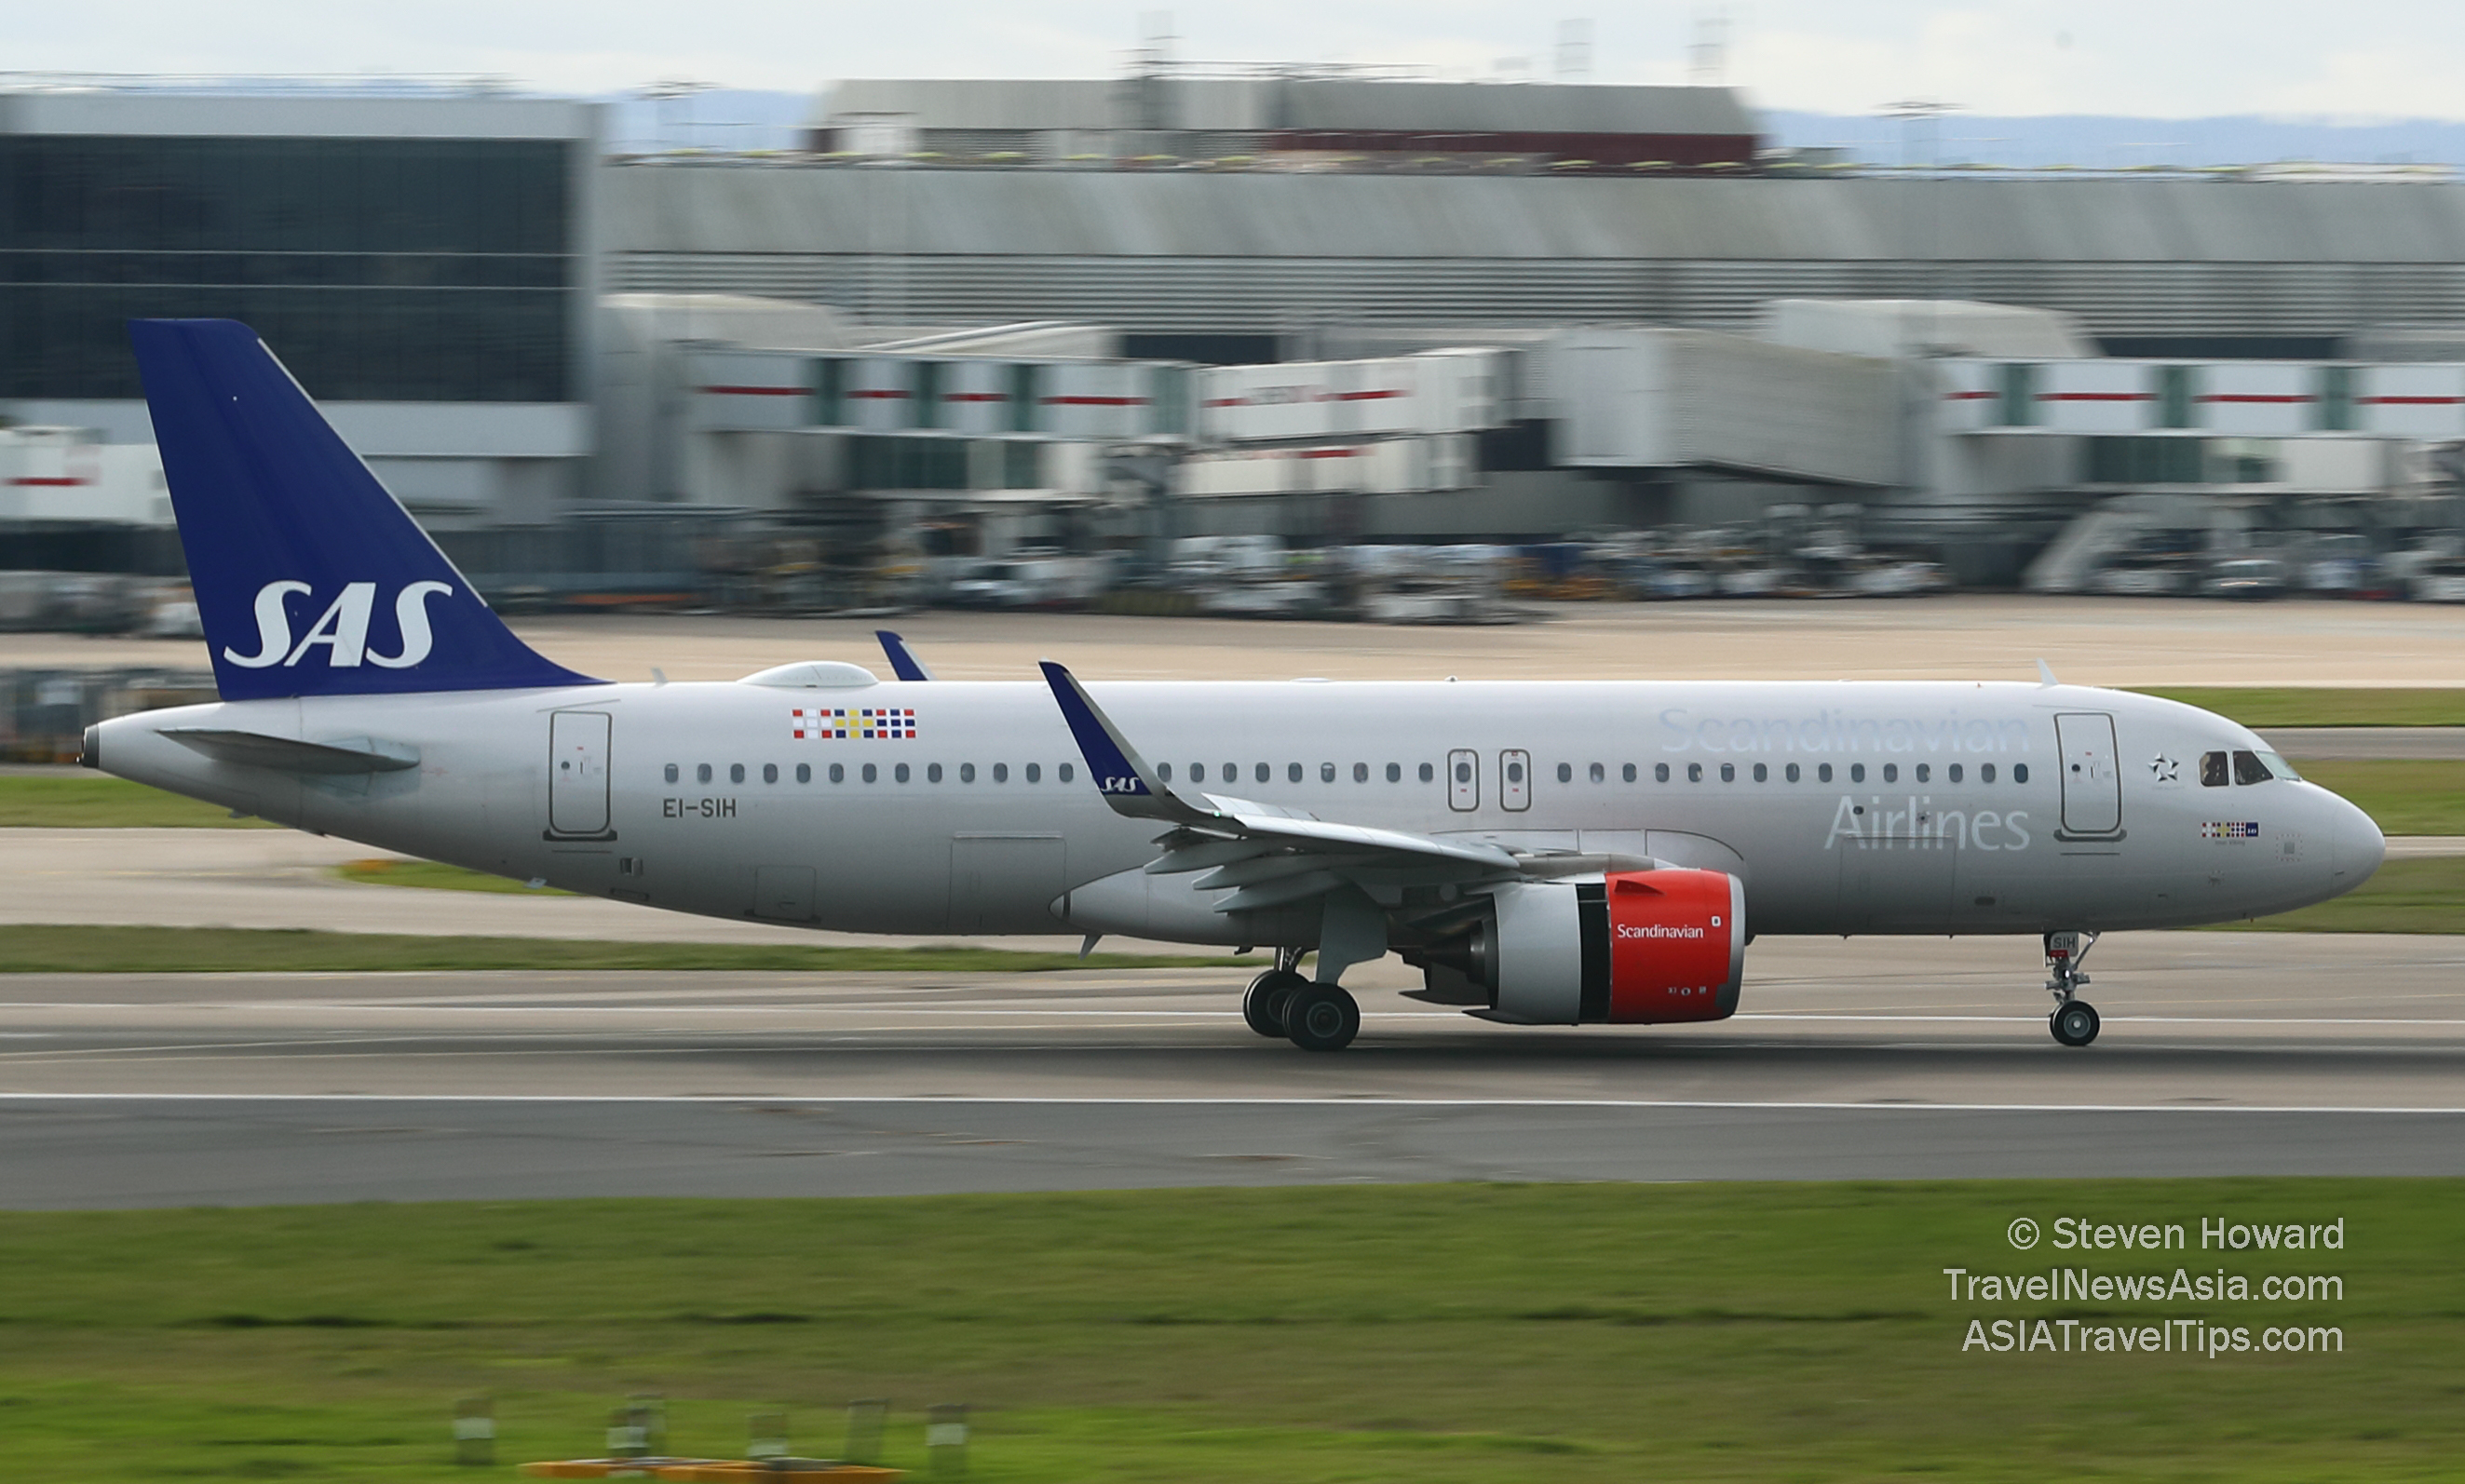 SAS Airbus A320 reg: EI-SIH. Picture by Steven Howard of TravelNewsAsia.com Click to enlarge.